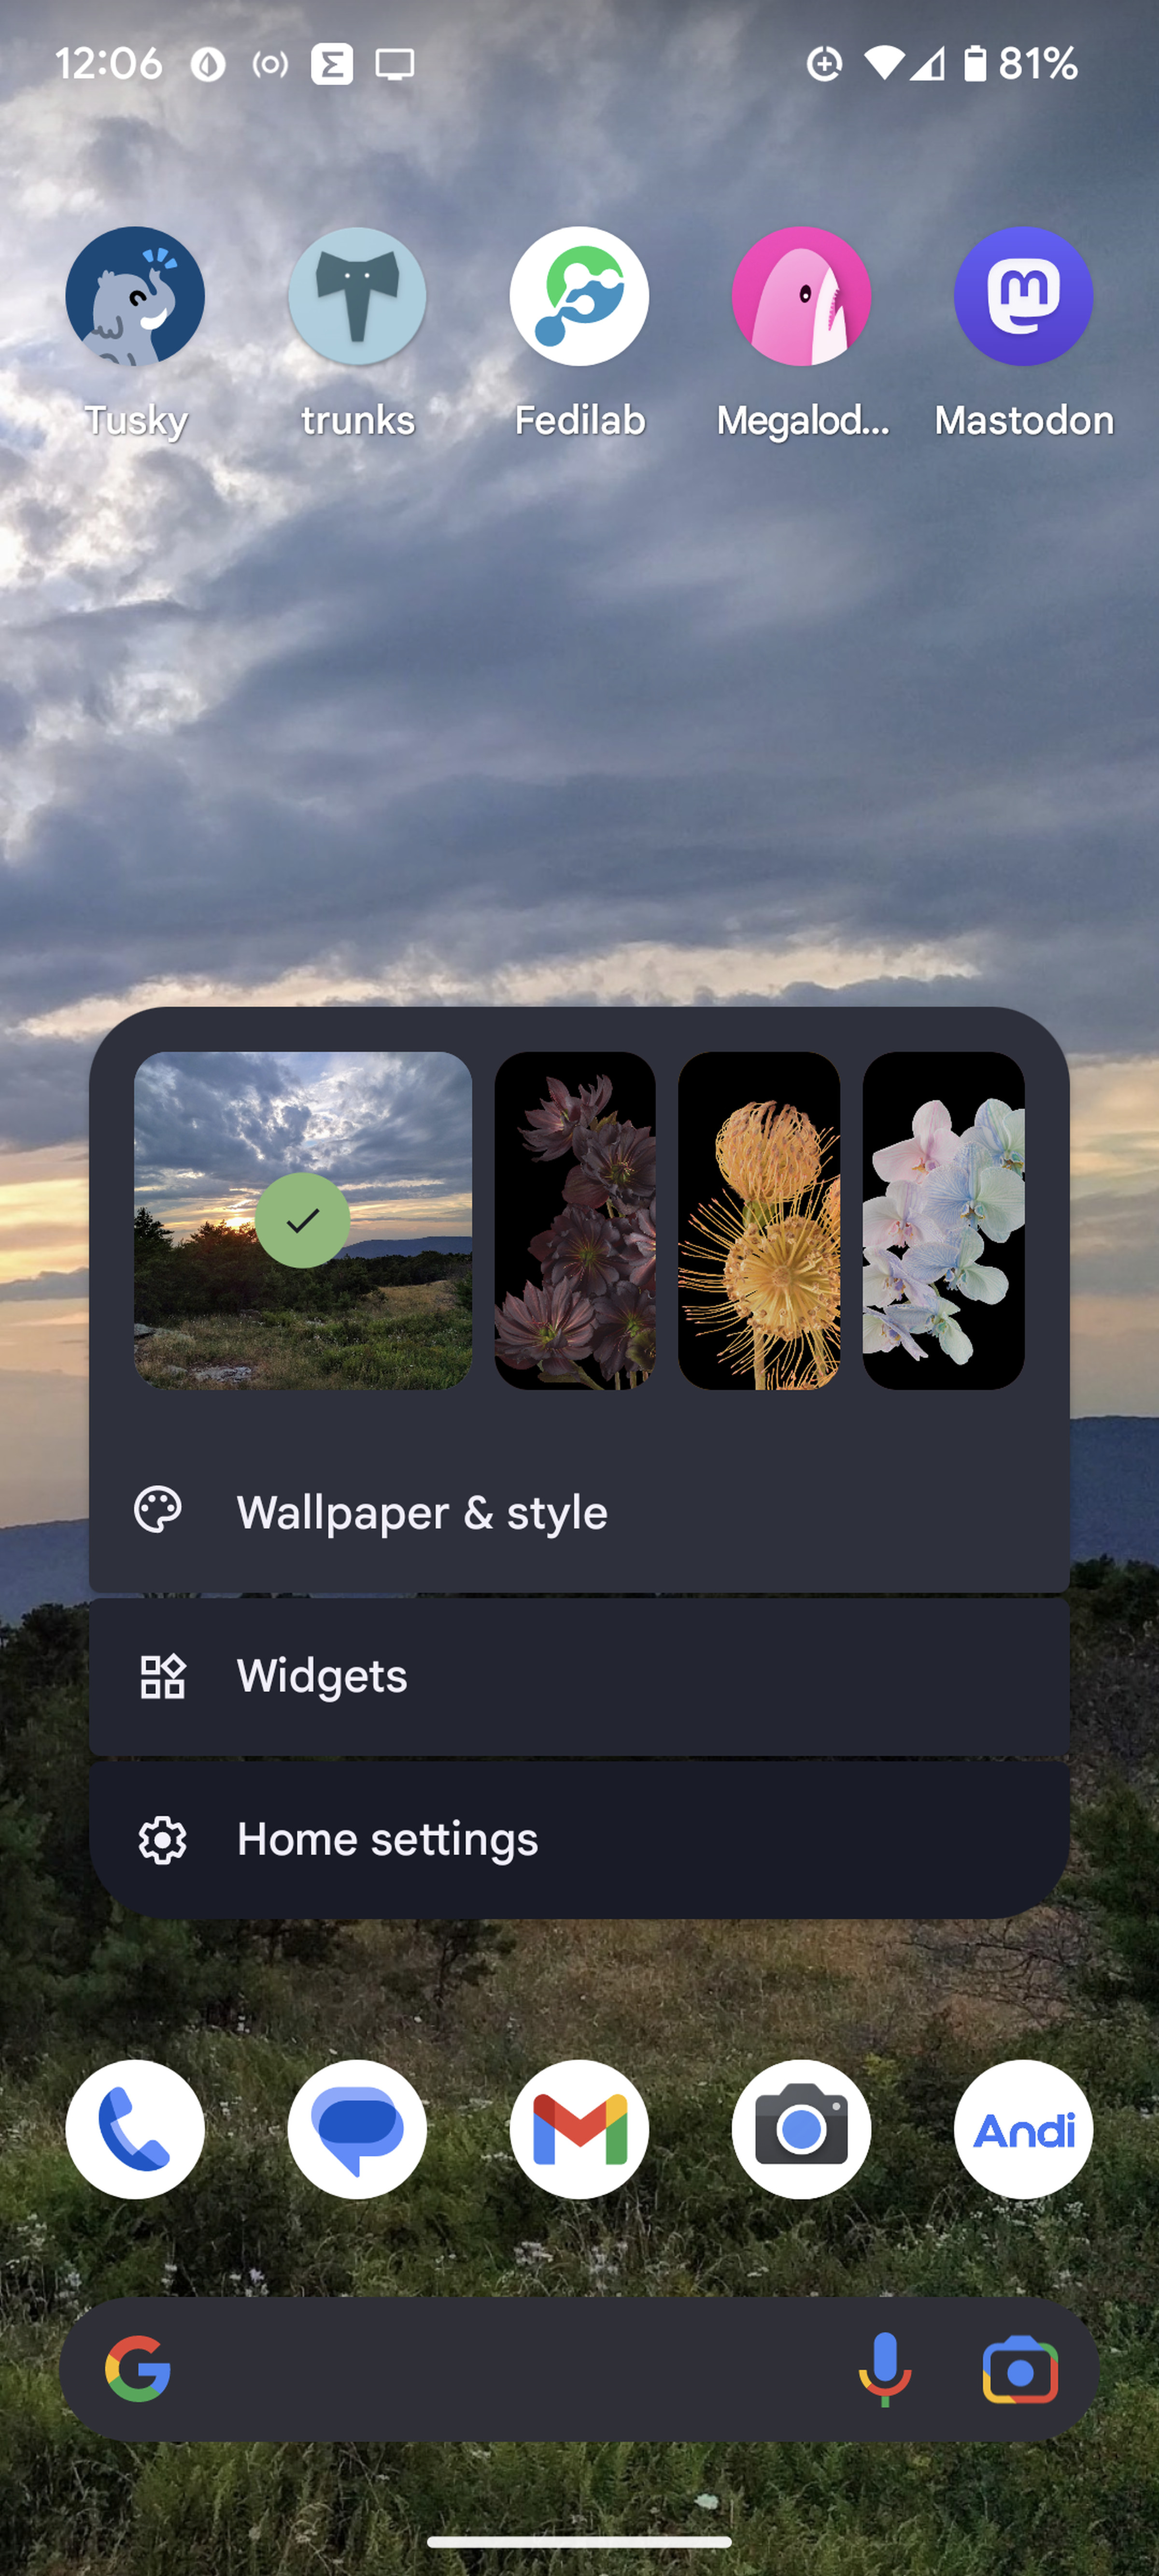 Android home screen with a pop-up menu showing different wallpapers, and three choices: Wallpaper & style, Widgets, and Home settings